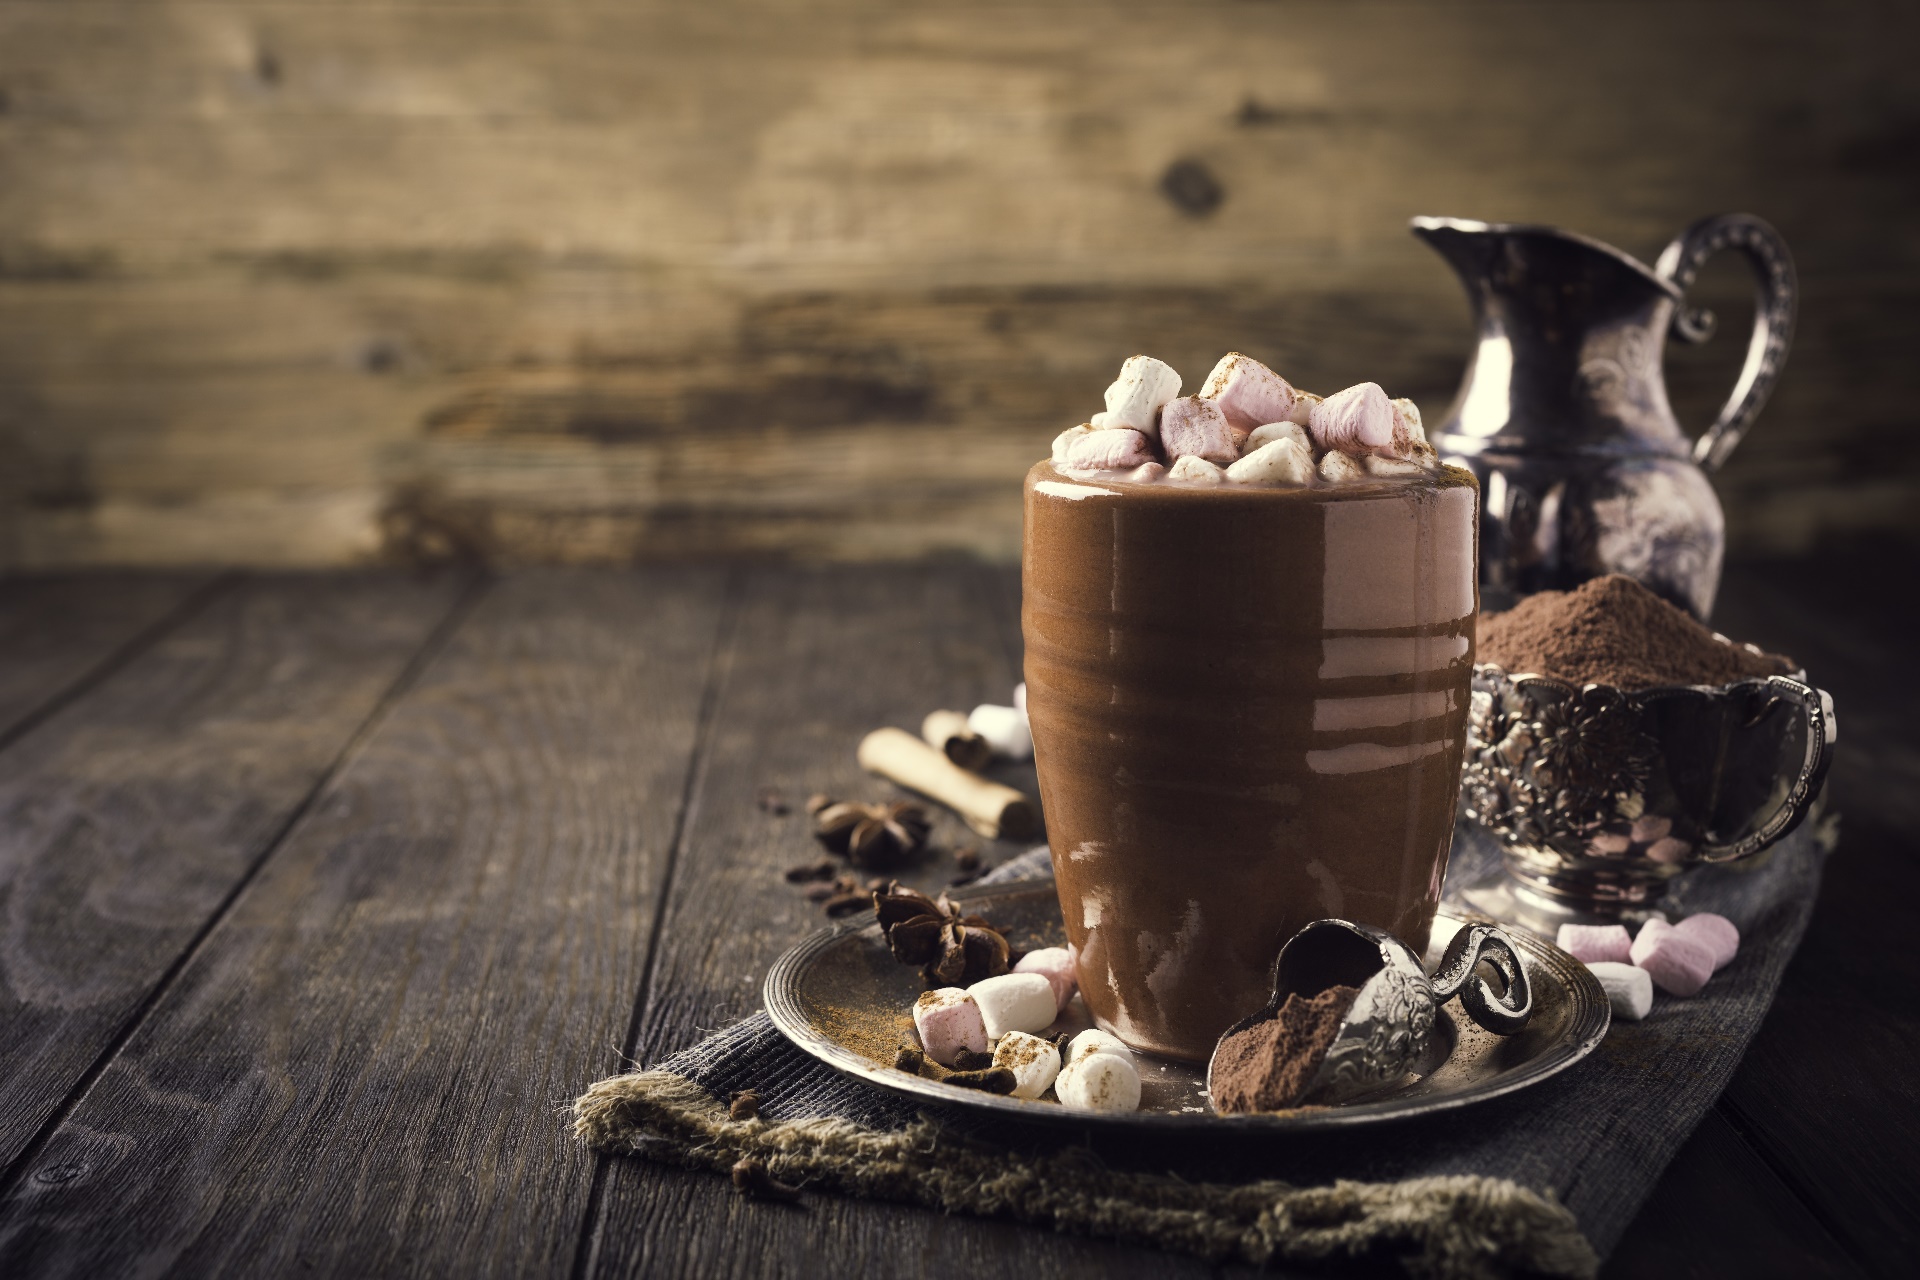 Food Sweets Cup Still Life Hot Cocoa Marshmallows Wooden Surface Chocolate 1920x1280